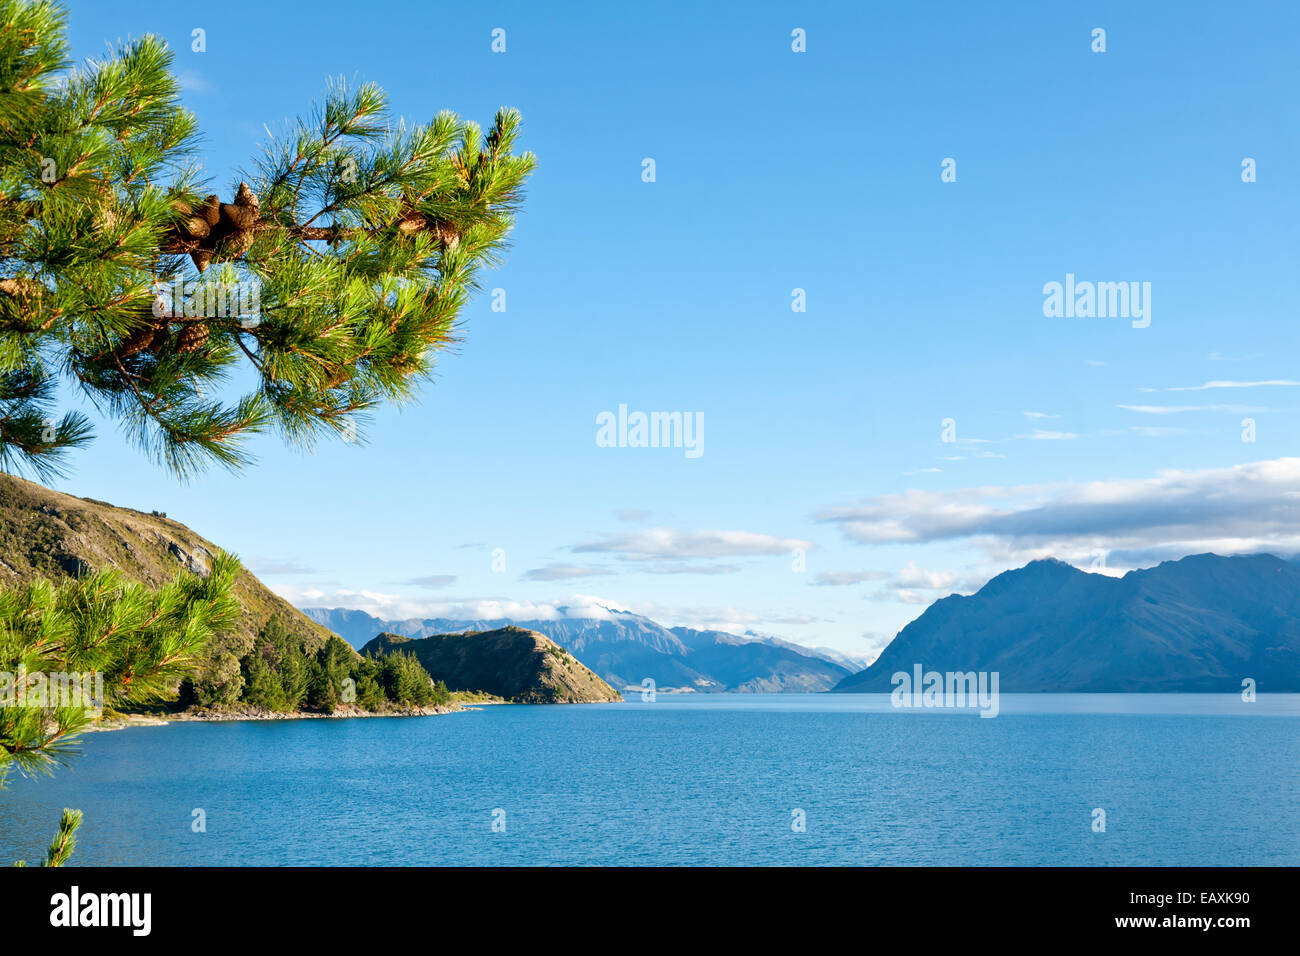 Morning on Lake Hawea in the South Island of New Zealand Stock Photo